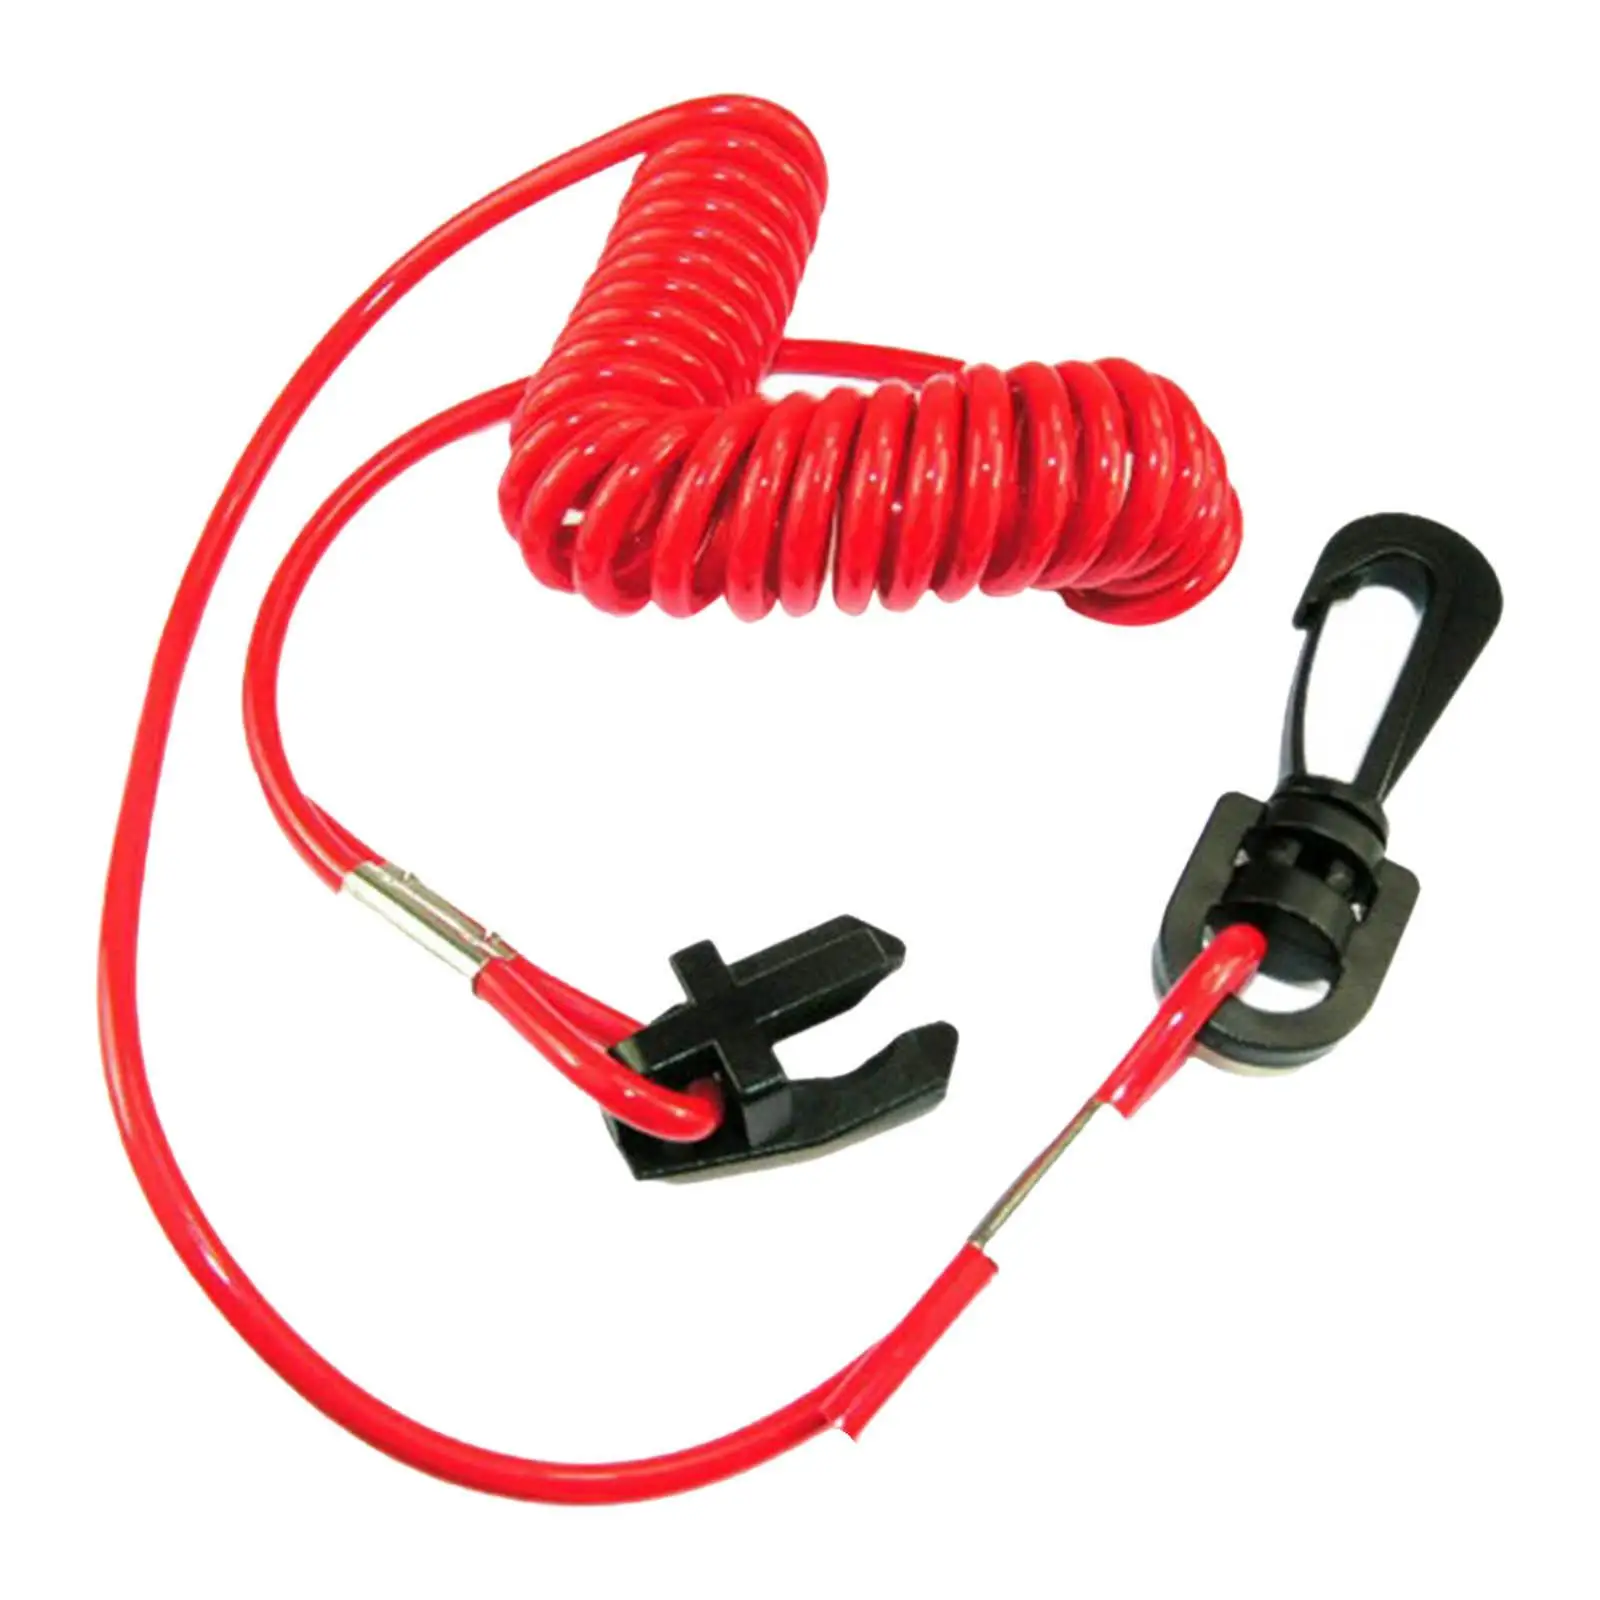 Outboard Engine Motor Safety Kill Stop Switch Lanyard, Red Safety Tether for for